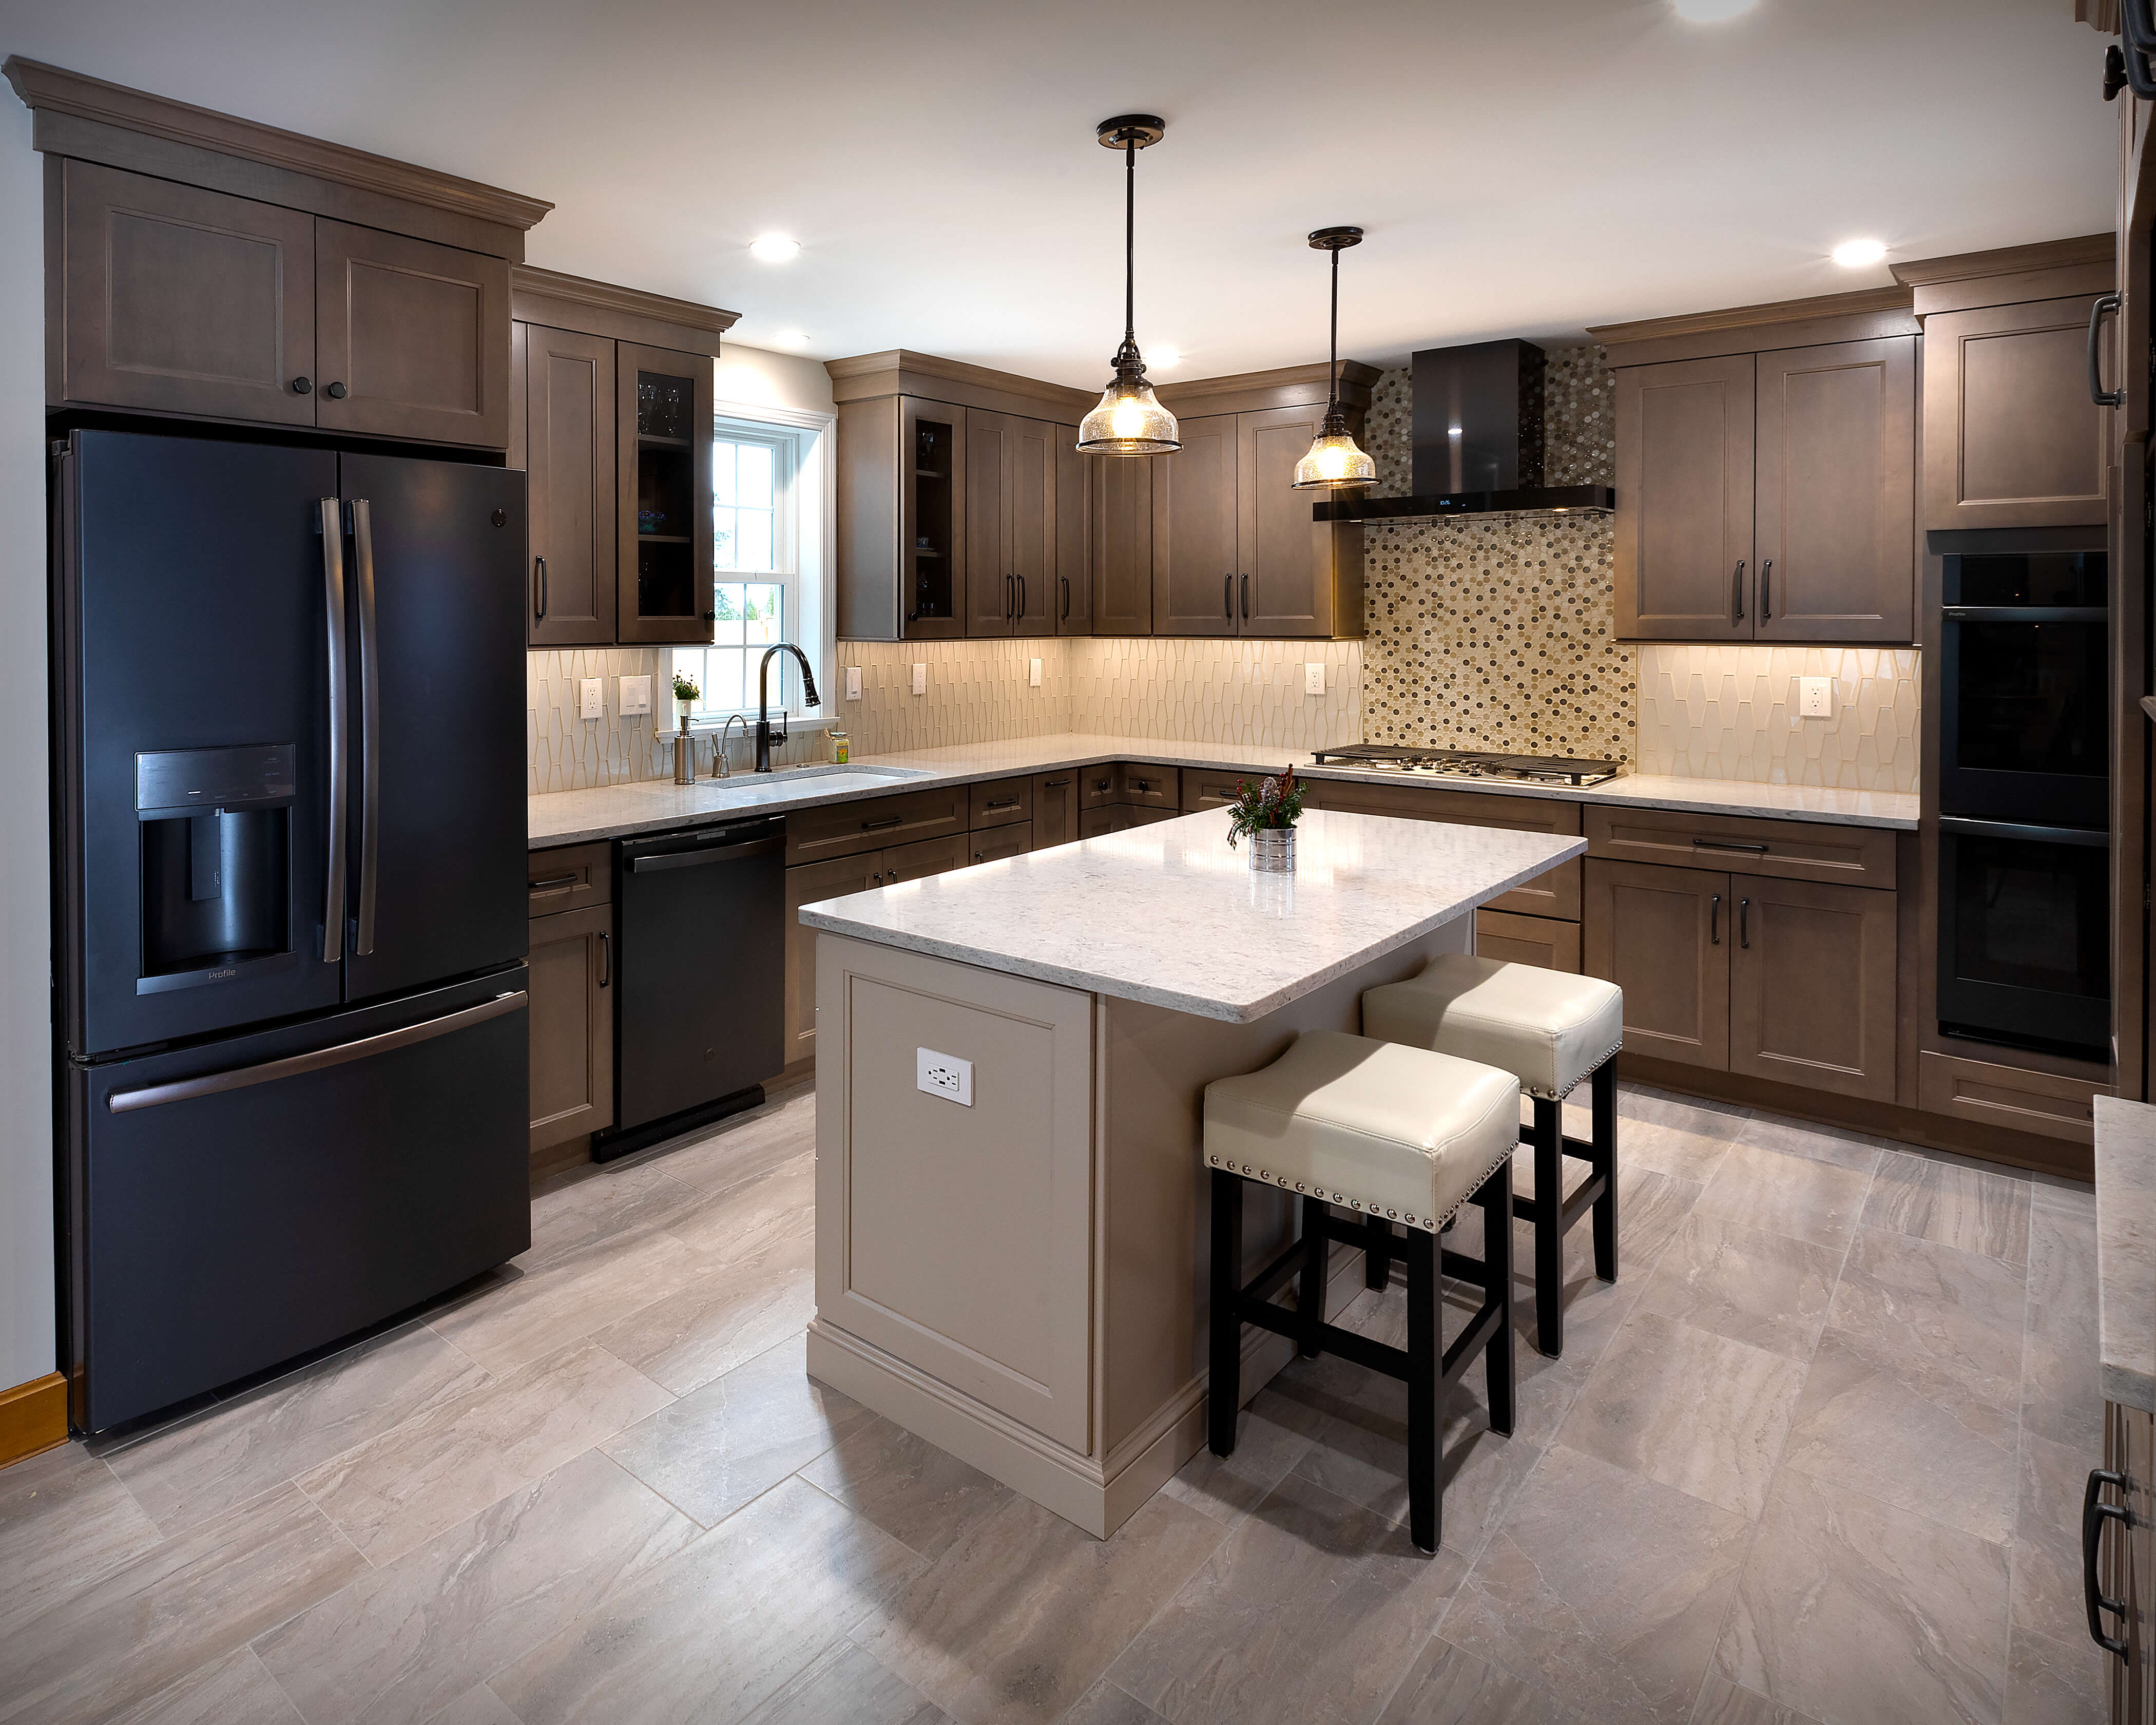 Kitchen Remodel with Full Height Cabinets | Viking Kitchen Cabinets